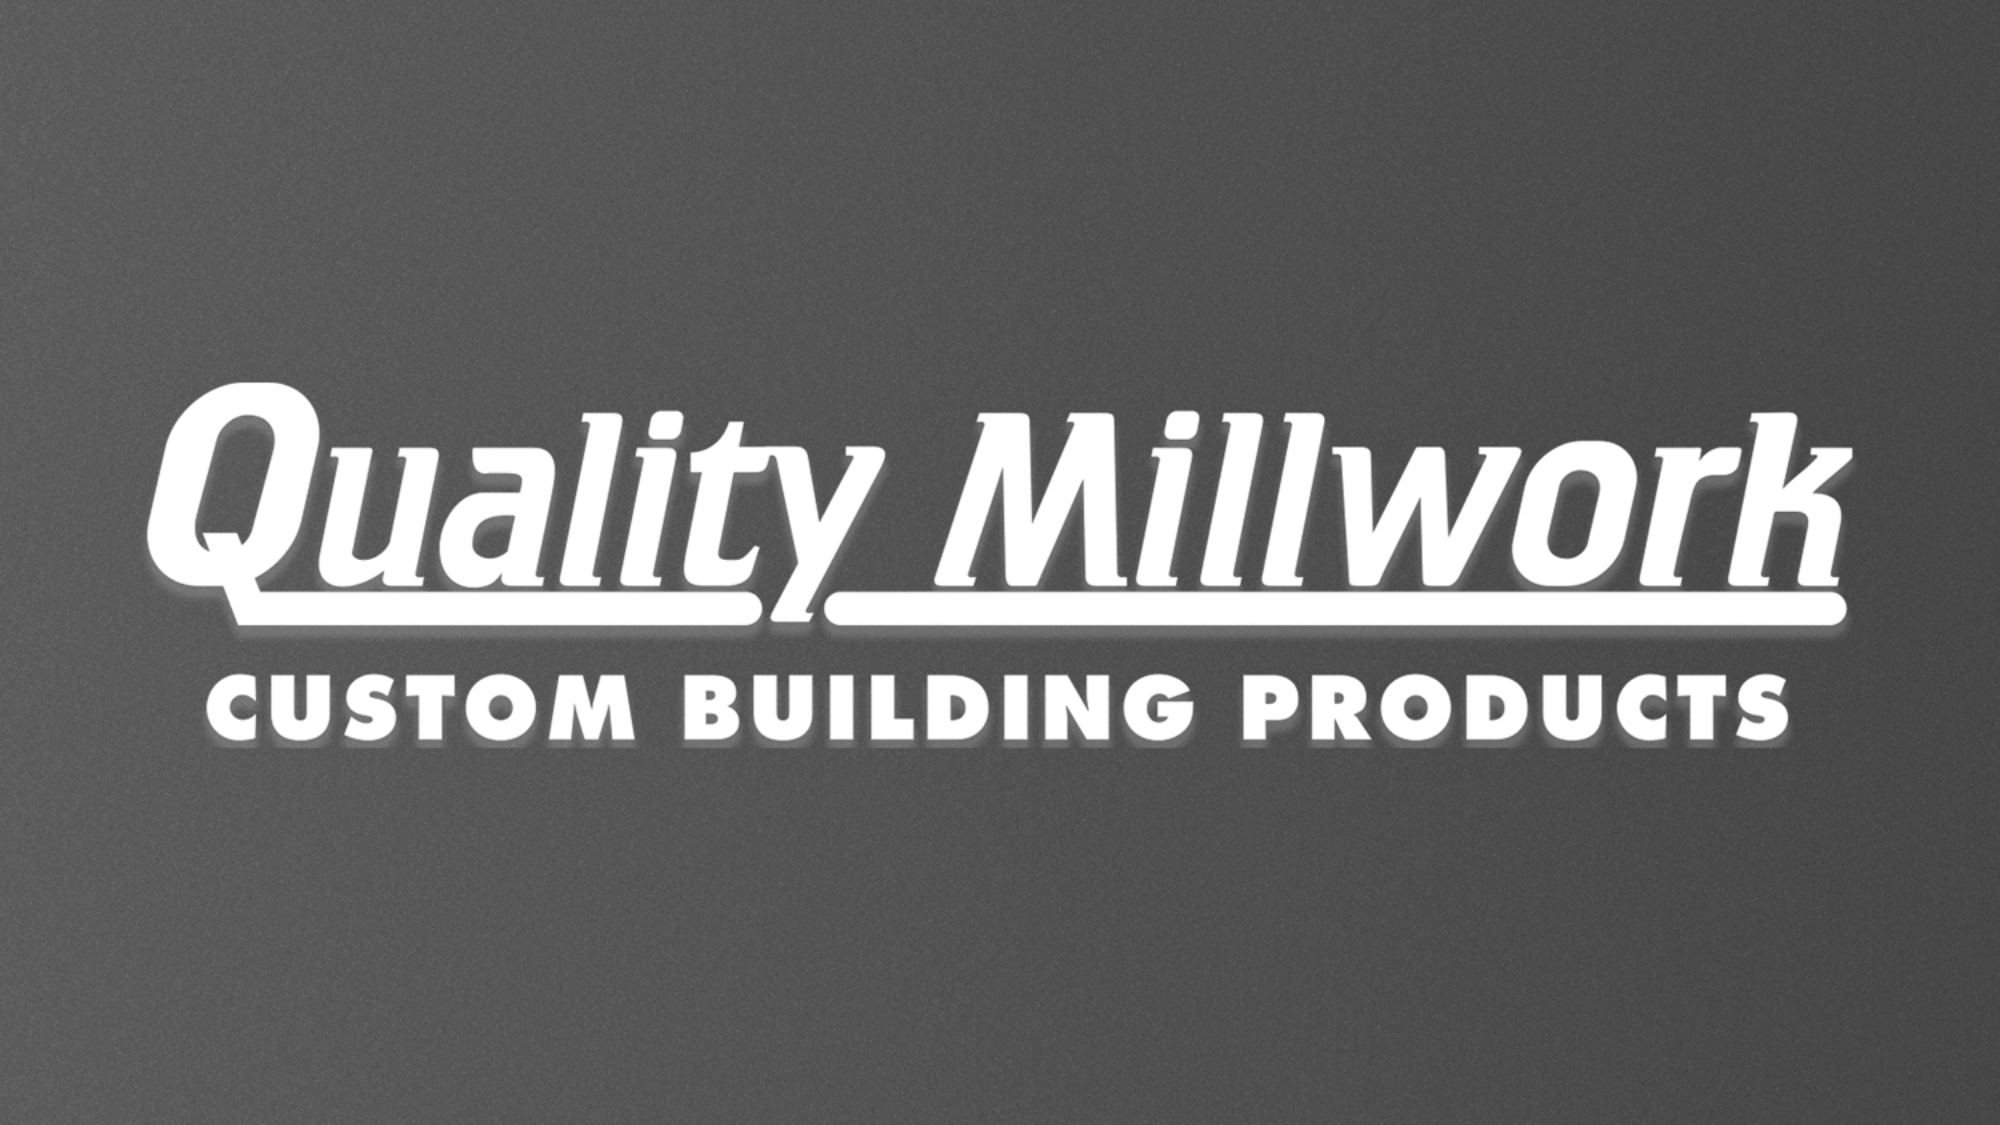 Read our comprehensive review of Quality Millwork, a trusted provider of millwork and woodworking products. Discover their commitment to craftsmanship, attention to detail, and exceptional customer service. Partner with Gott Marketing for all your millwork needs and marketing solutions.